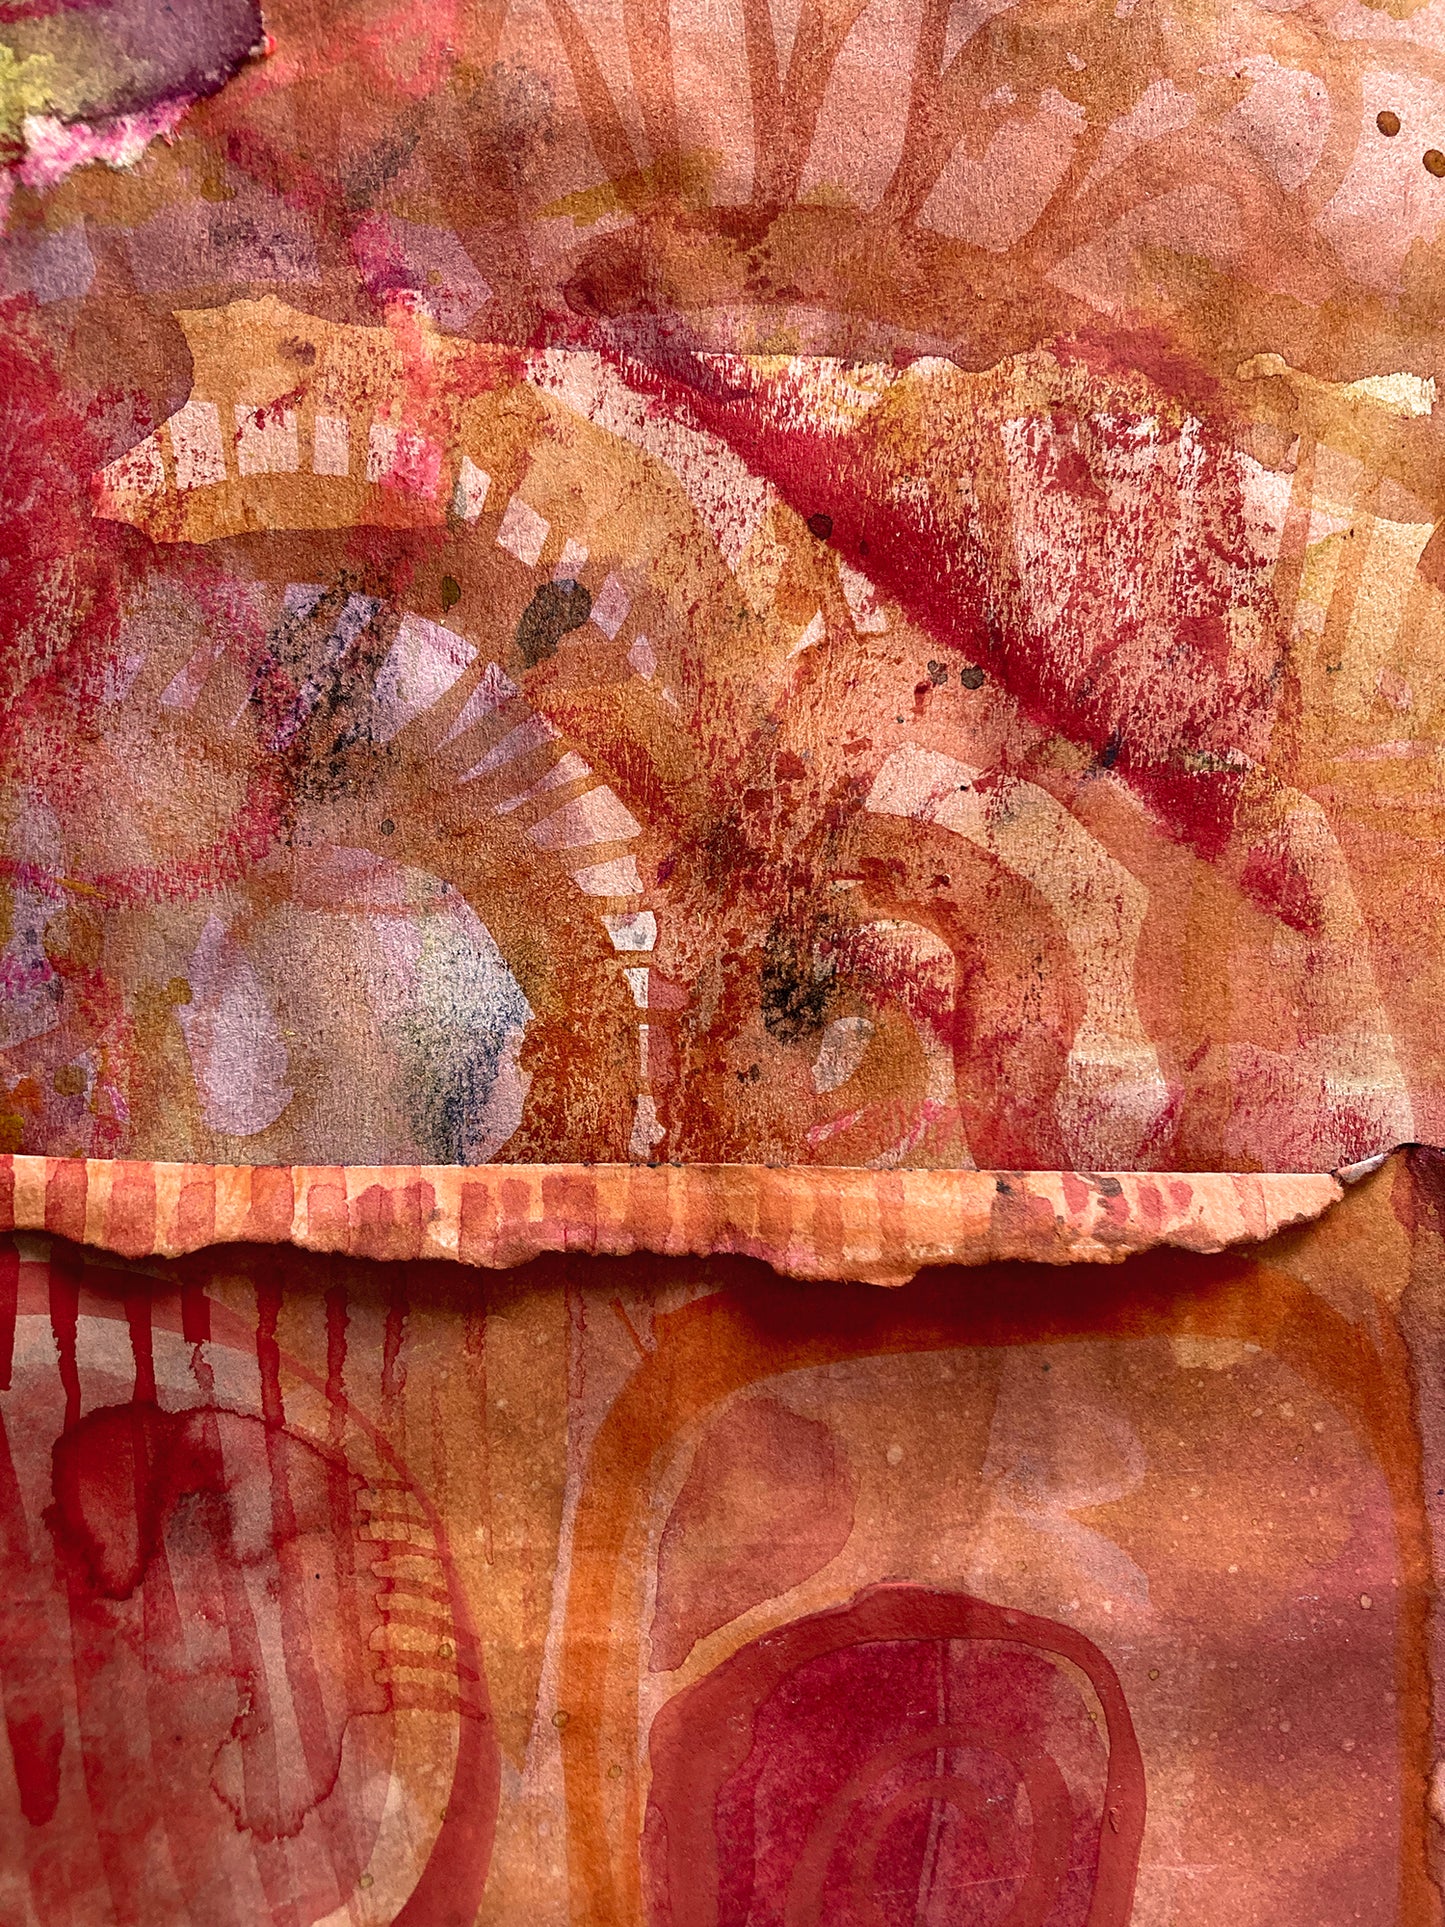 Painted Paper Bundles for Mixed Media Collage | "Terracotta Sandstone" |